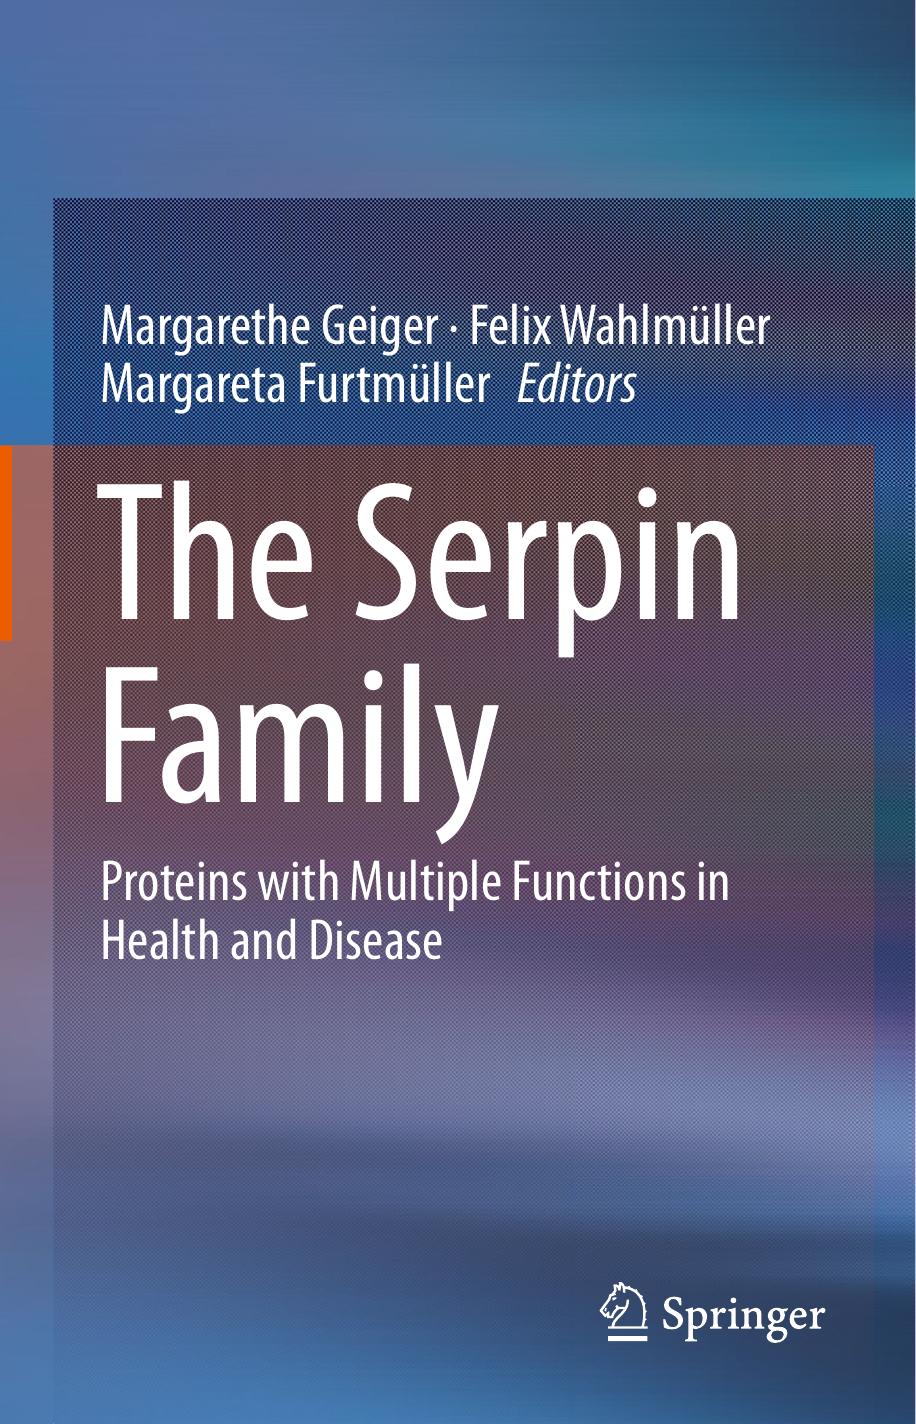 The Serpin Family  Proteins with Multiple Functions in Health and Disease (2016)